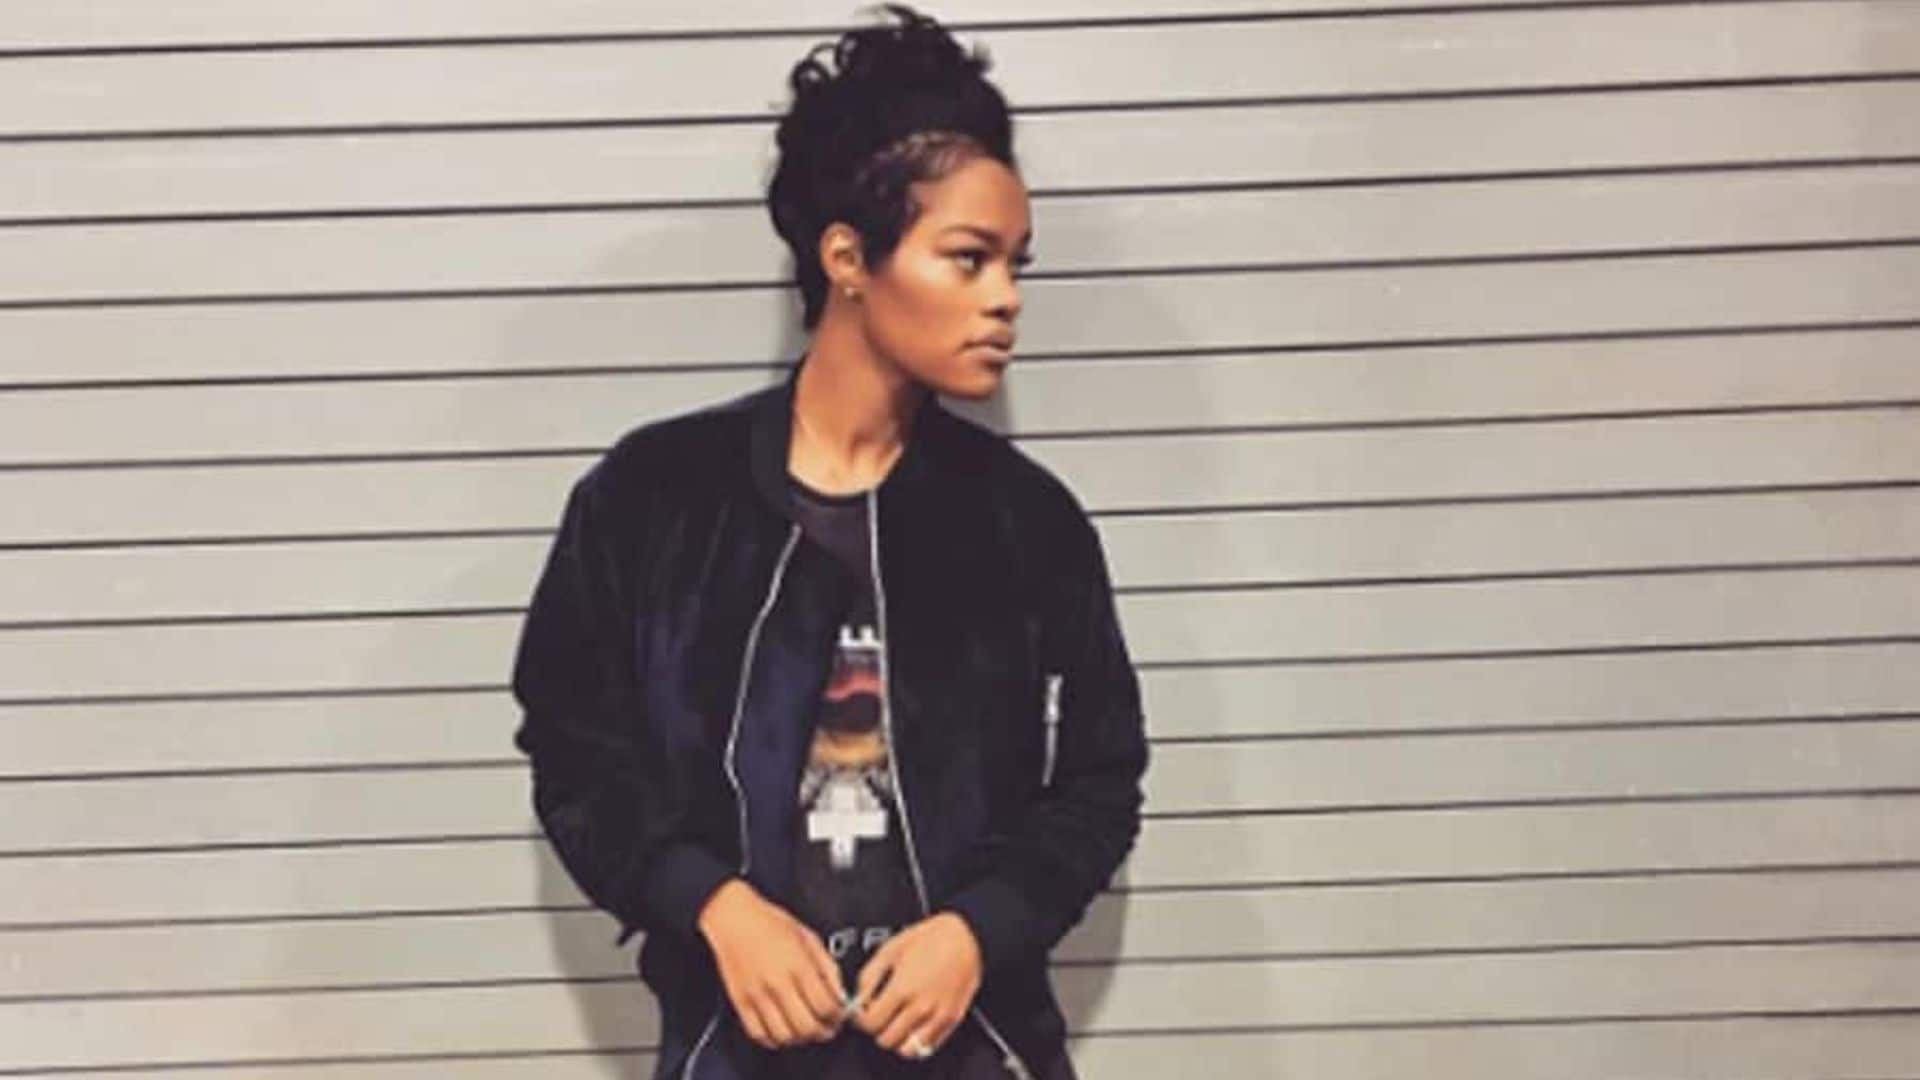 Teyana Taylor just dances as her workout: Get to know the star of Kanye West's video 'Fade'